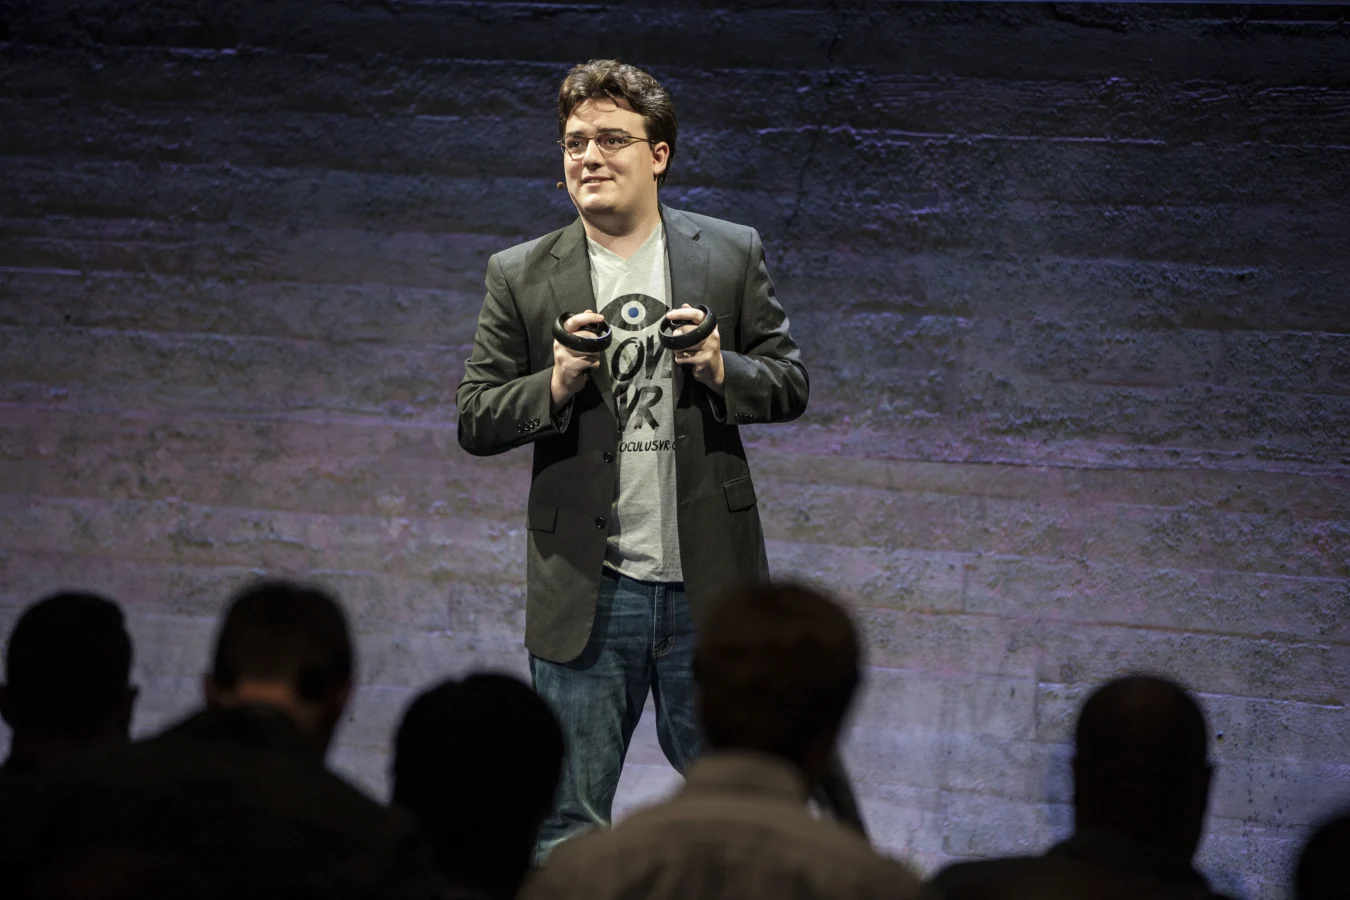 Palmer Luckey, founder and inventor of Oculus VR, speaks during a media event to introduce the Oculus Rift virtual reality headset and the Oculus Touch hand controllers in San Francisco, California on Wednesday, June 11, 2015. (Photo by Ramin Talaie/Corbis via Getty Images)